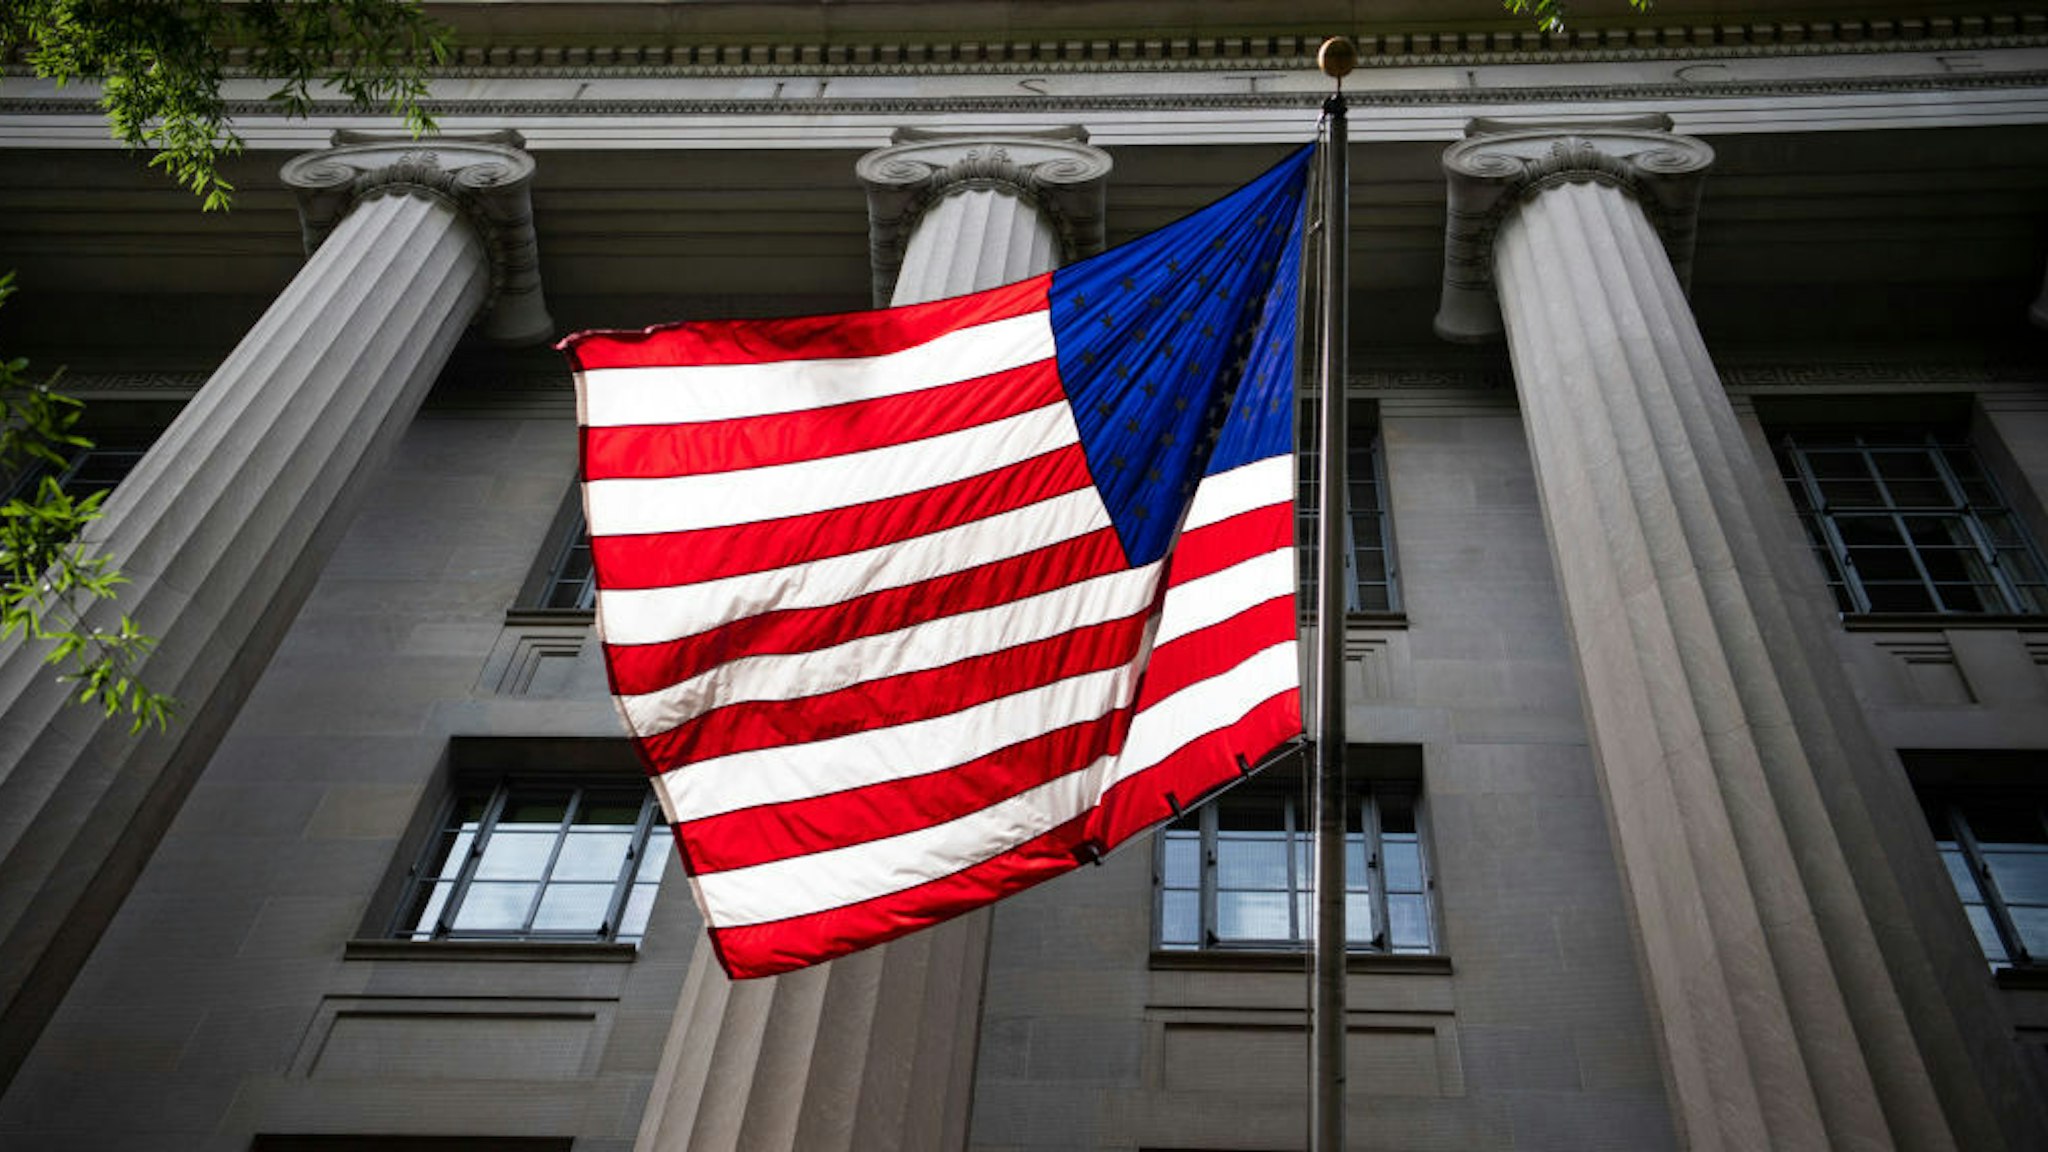 An American flag is displayed on the Pennsylvania Avenue side of the Department of Justice on Wednesday, June 3, 2020.(Photo By Tom Williams/CQ-Roll Call, Inc via Getty Images)